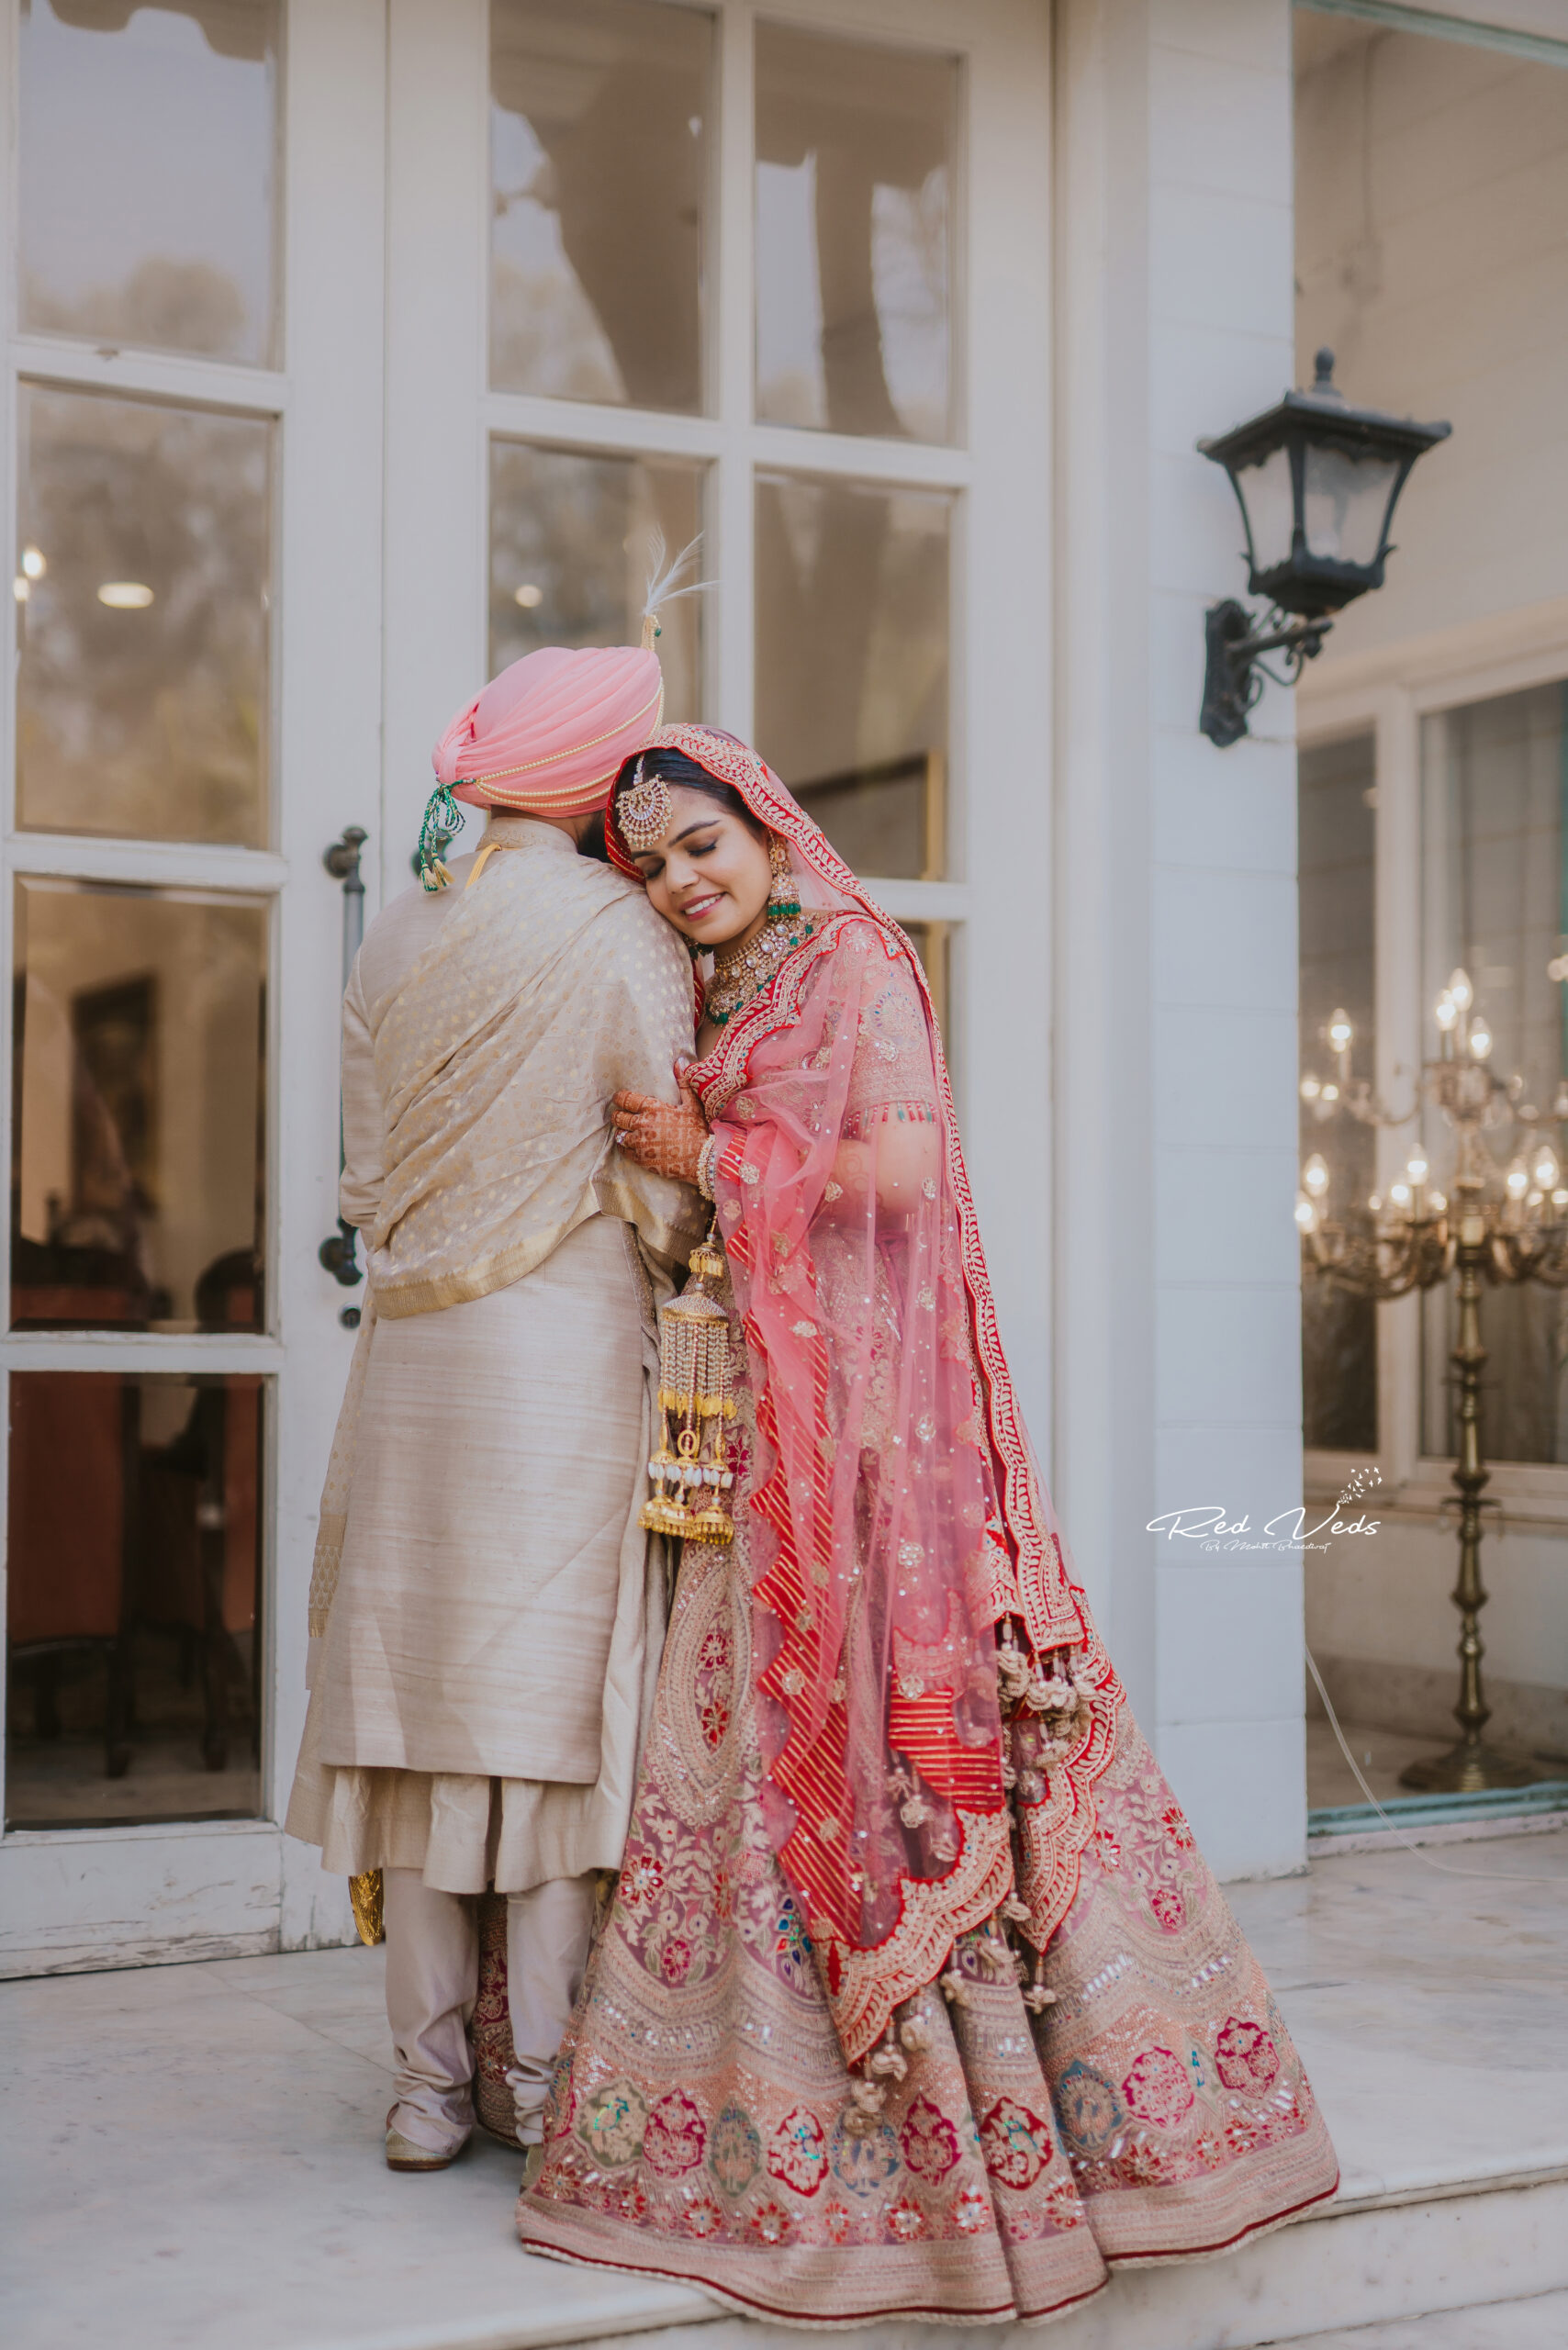 Best Post Wedding Photography In Bangalore | Candid wedding photography, Candid  wedding photographer, Candid wedding